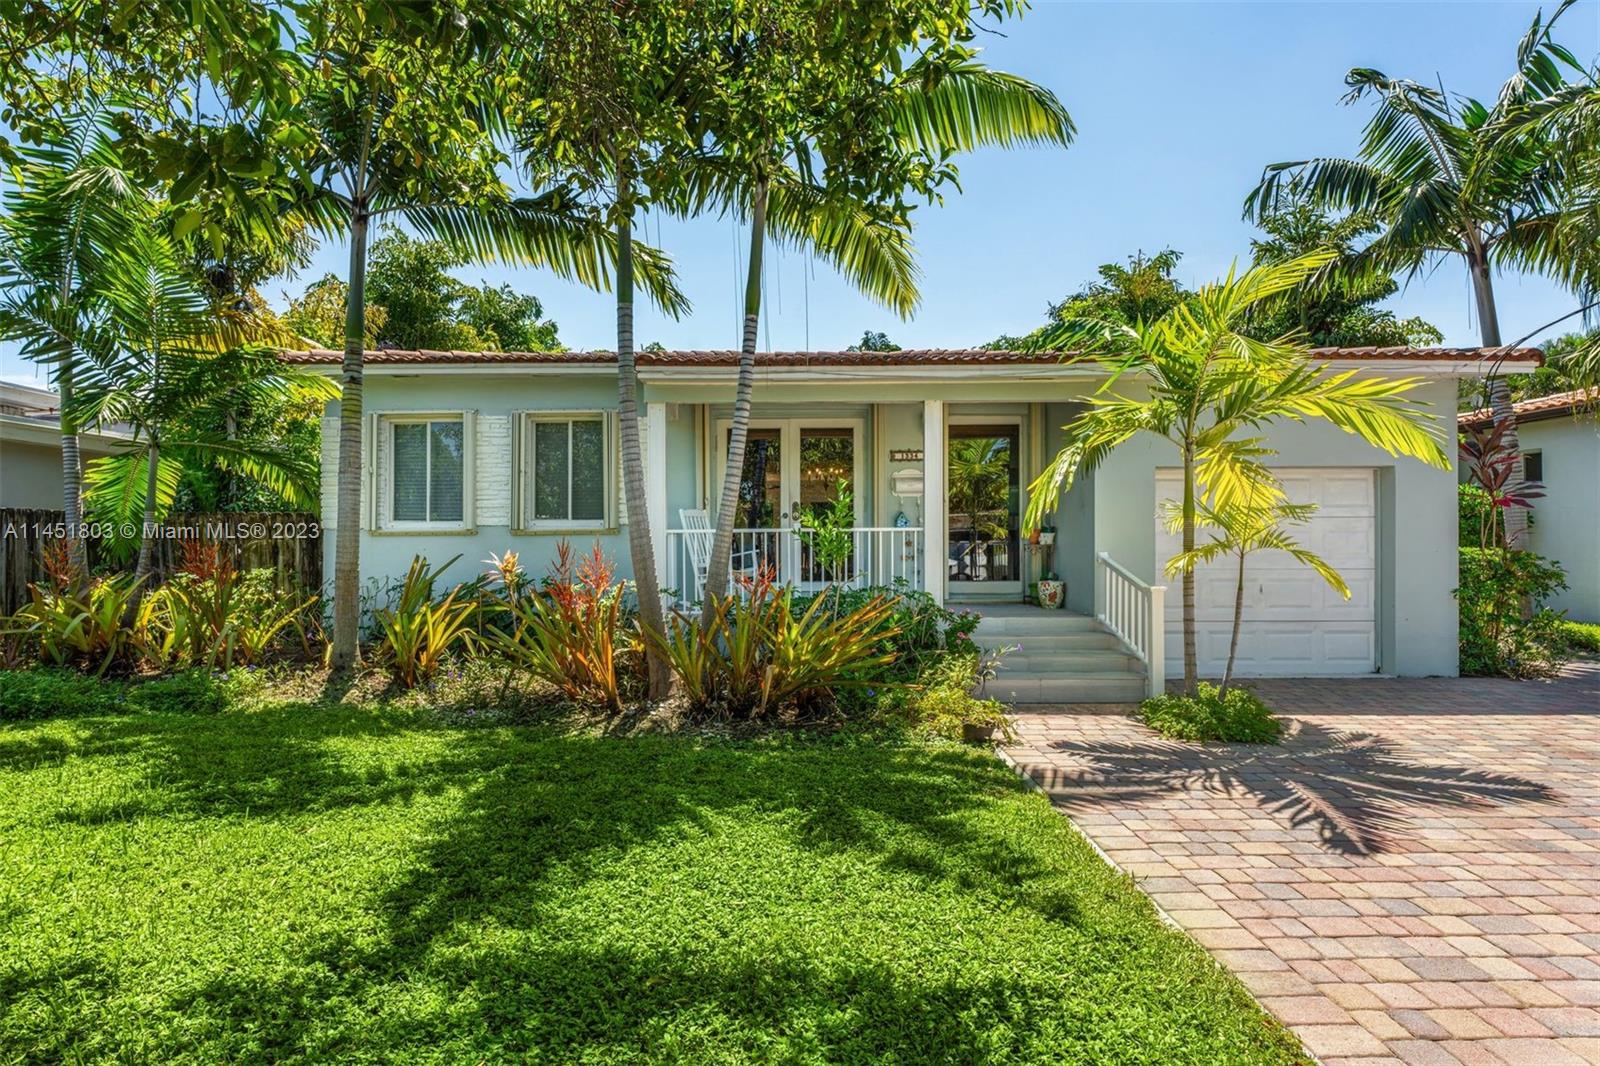 An incredible opportunity in one of the most family-friendly waterfront communities in Miami Beach. Biscayne Point in North Beach provides ultimate privacy, security and serenity. It is also surrounded by some of the best schools in Miami-Dade County and is just blocks from the beach. This 3 Bedroom, 2 Bathroom home has tremendous potential with either a light refresh or an expansion and renovation vision. It is very well appointed on the quietest tree-lined streets on the island.